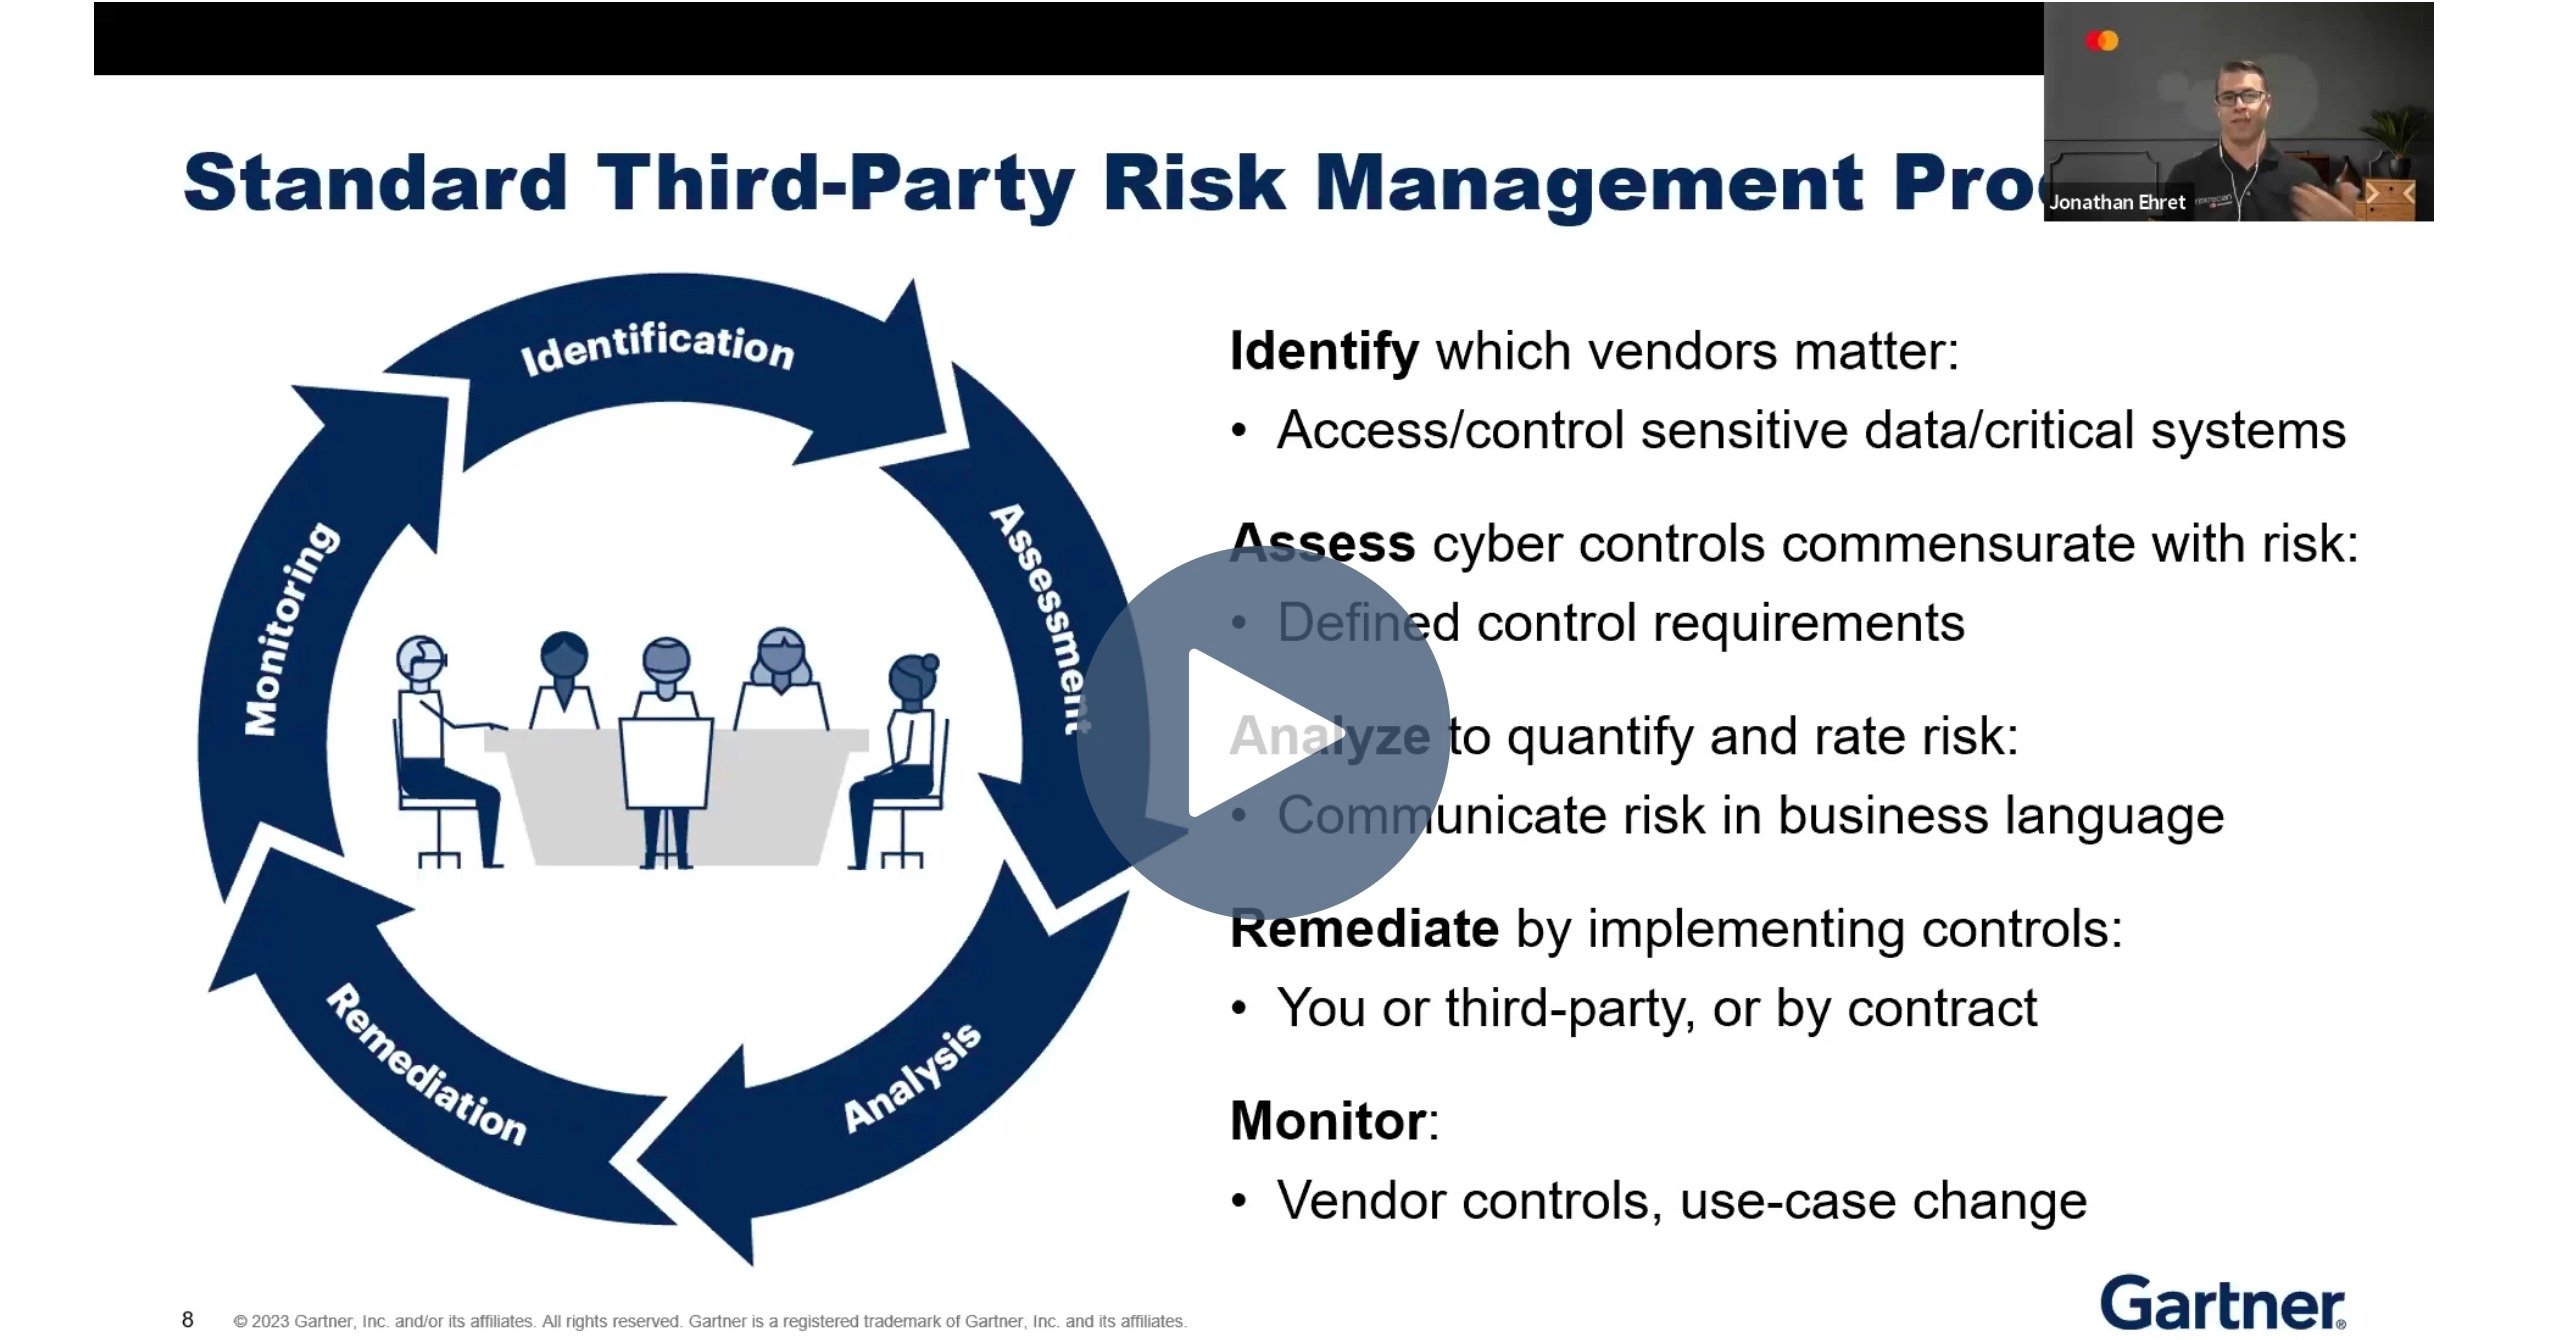 Video: What’s shaping the future of cyber risk management?